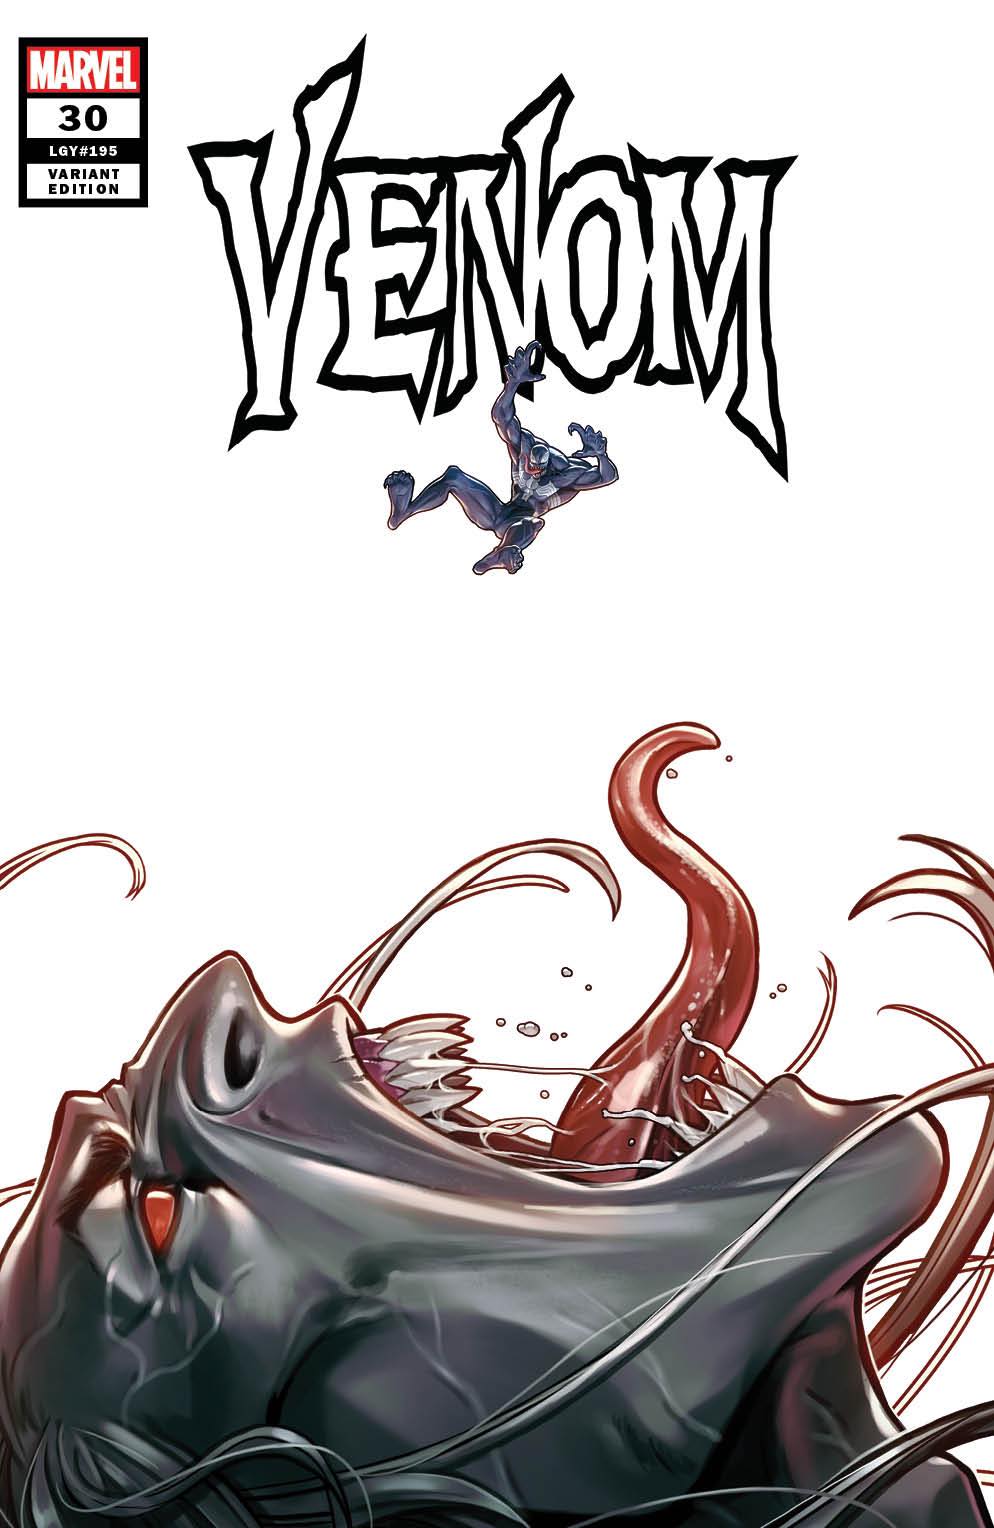 VENOM #30 WOO CHUL LEE 'VENOM #3 HOMAGE' VARIANT LIMITED TO 1500 COPIES WITH NUMBERED COA